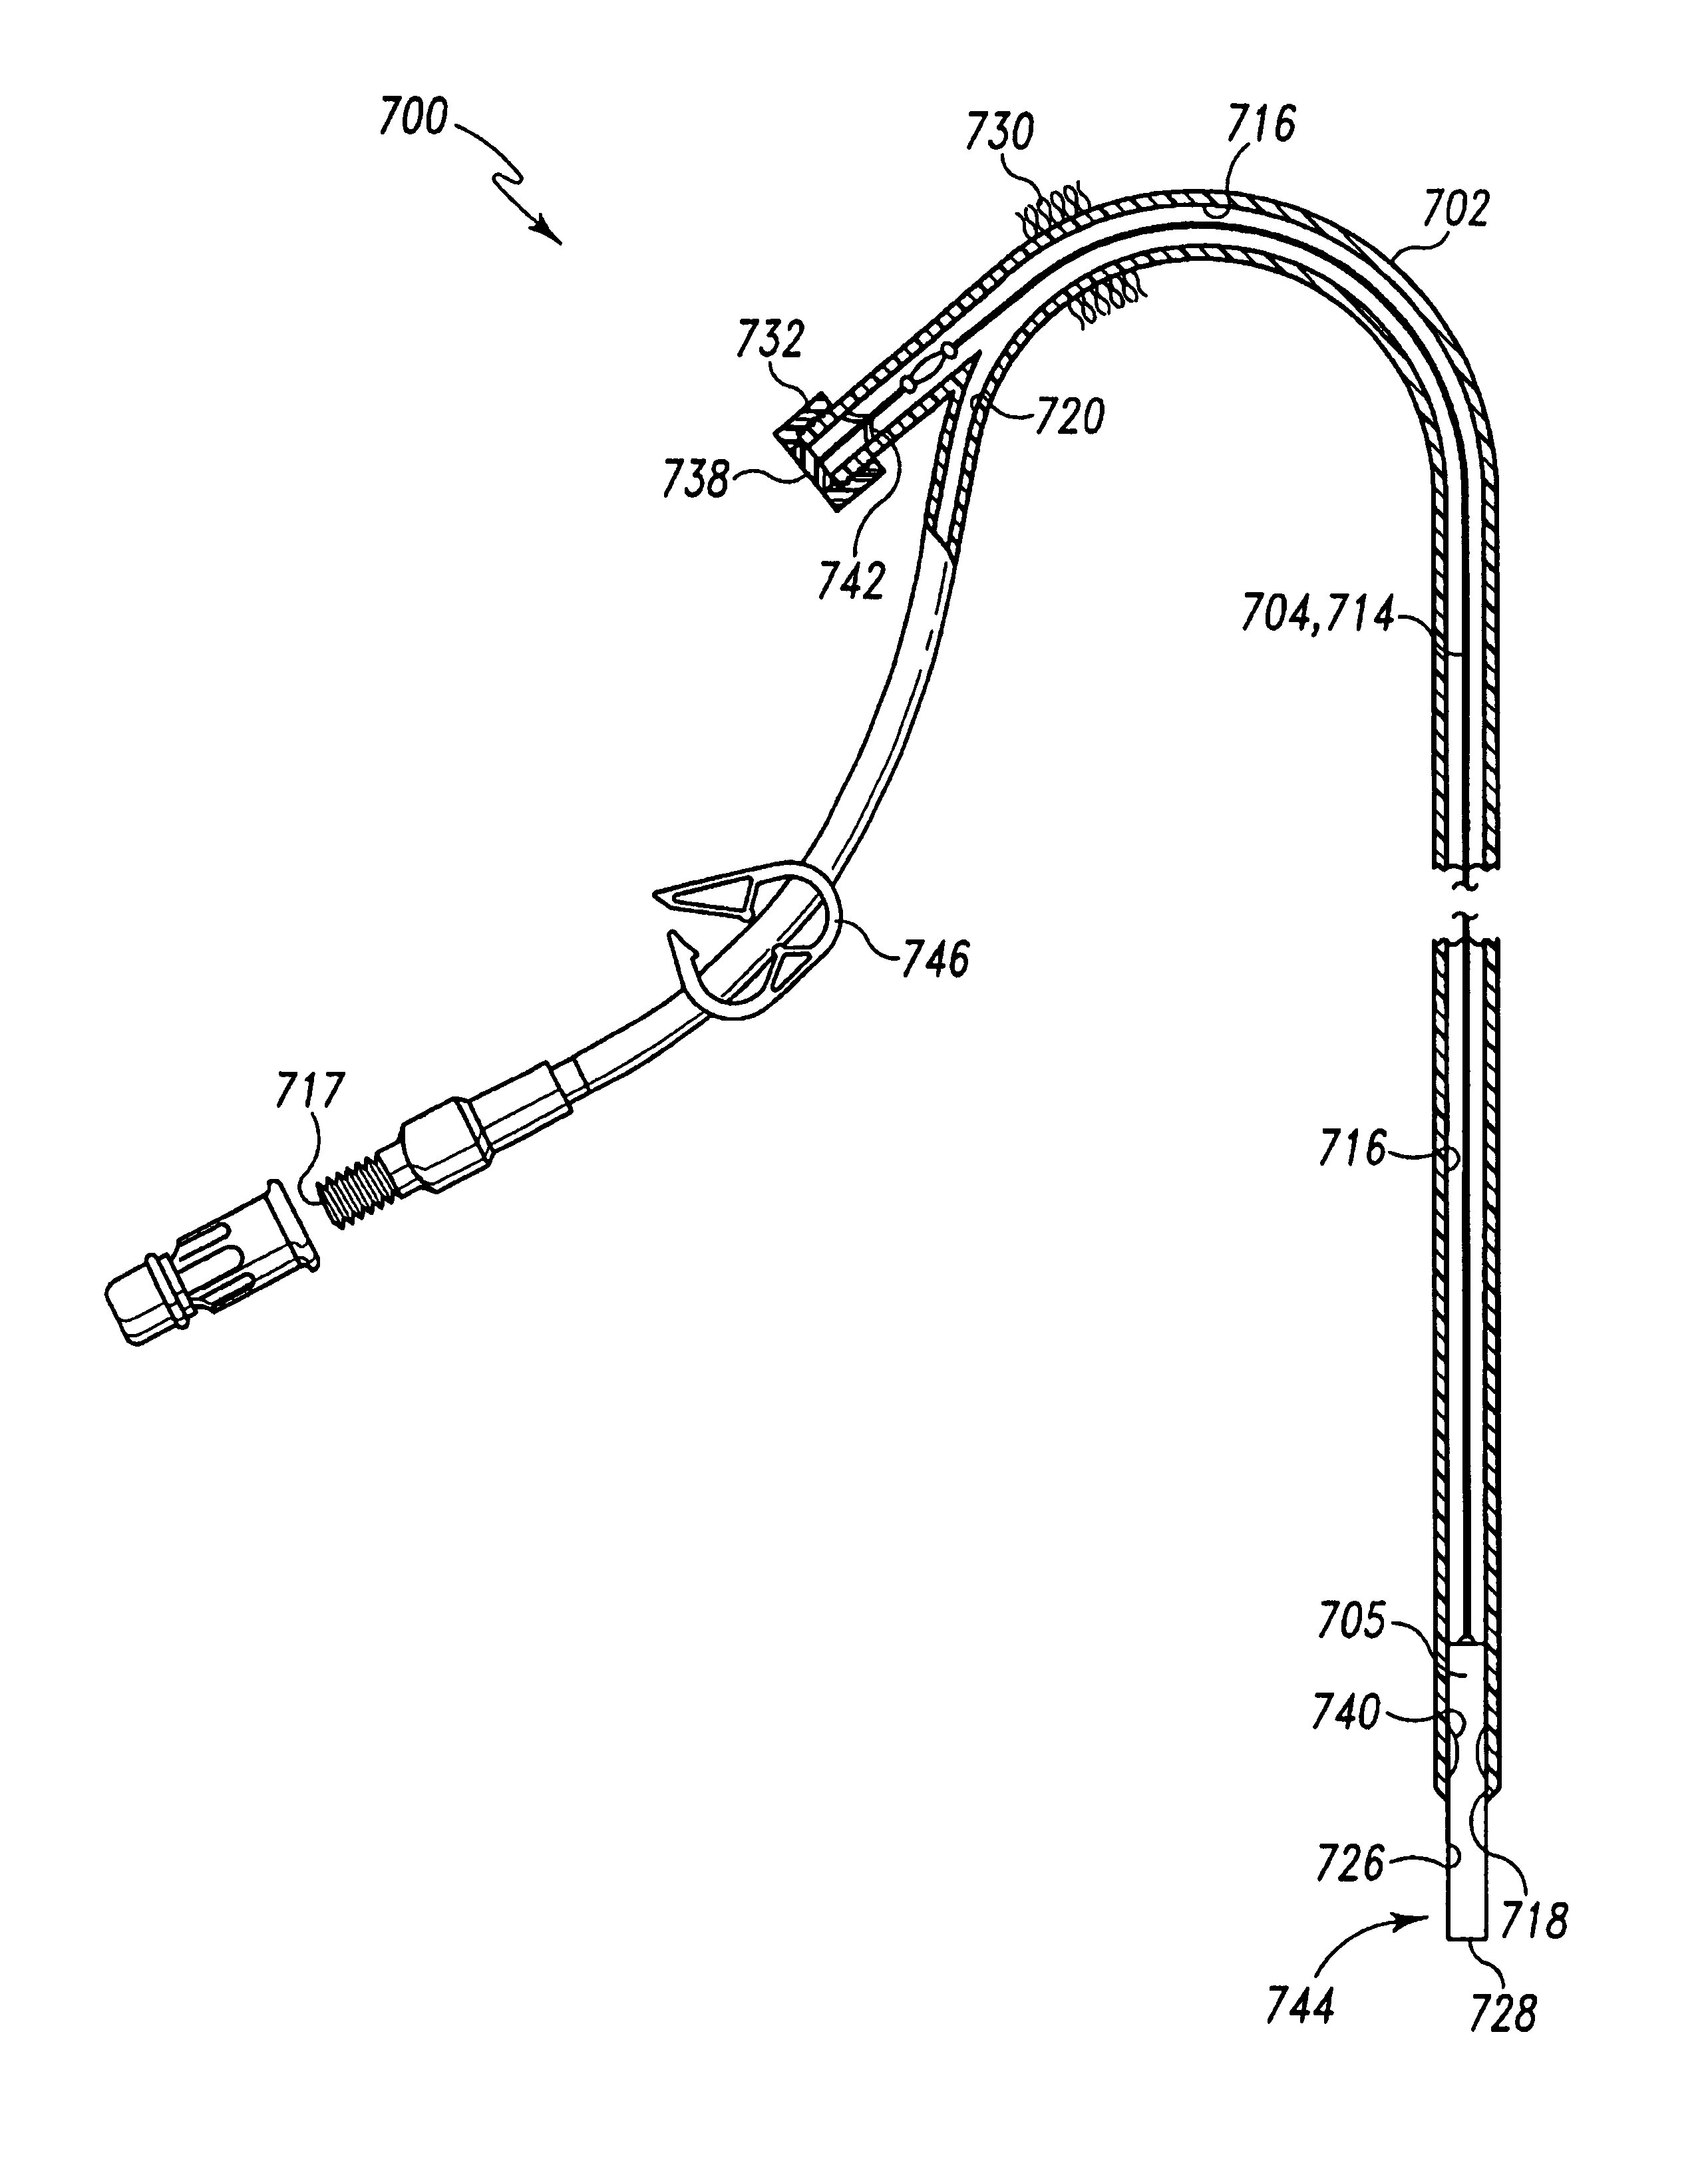 Subcutaneous port catheter system and associated method